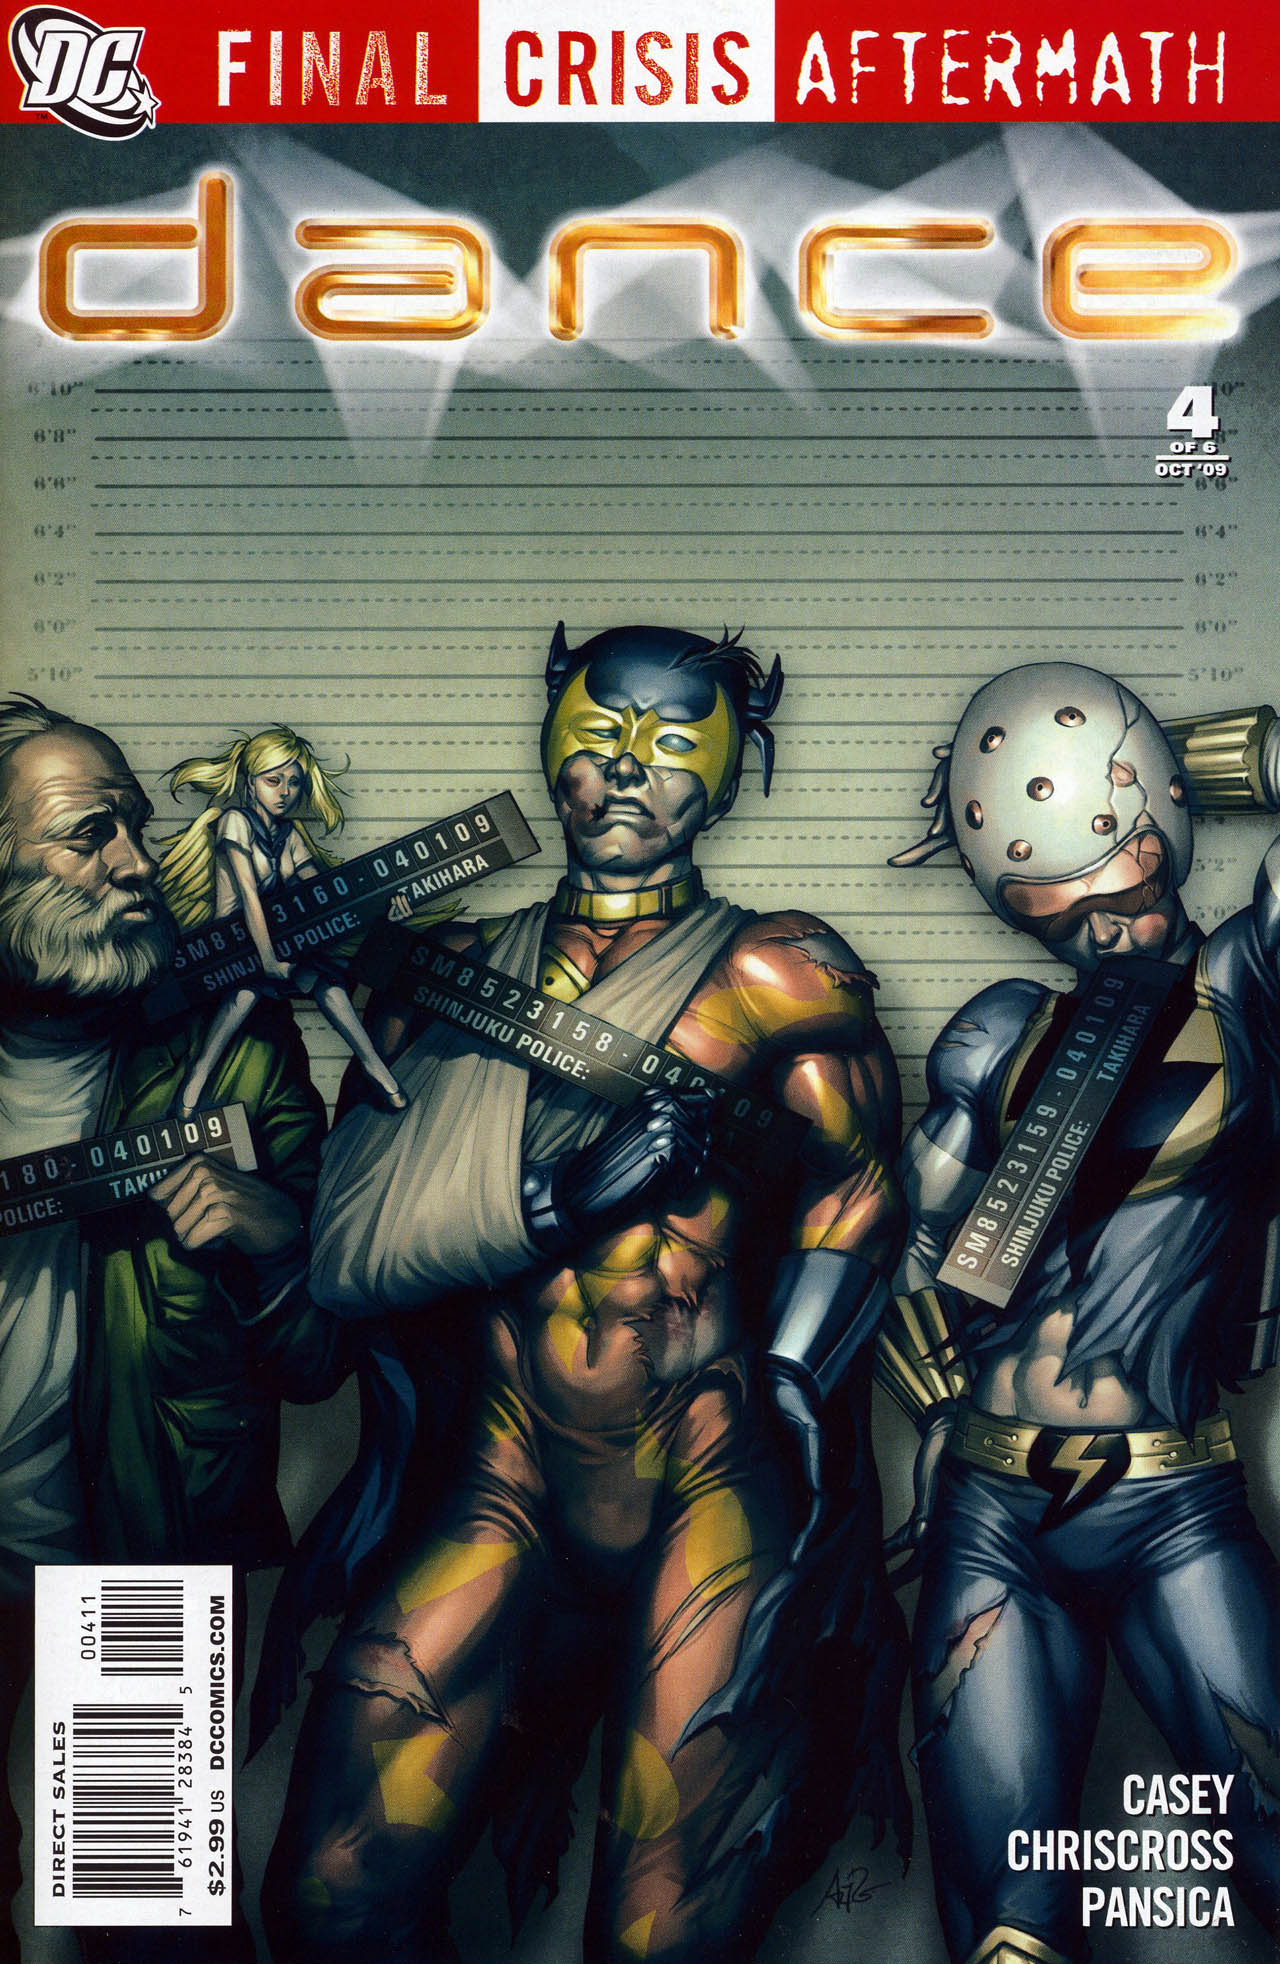 Read online Final Crisis Aftermath: Dance comic -  Issue #4 - 1